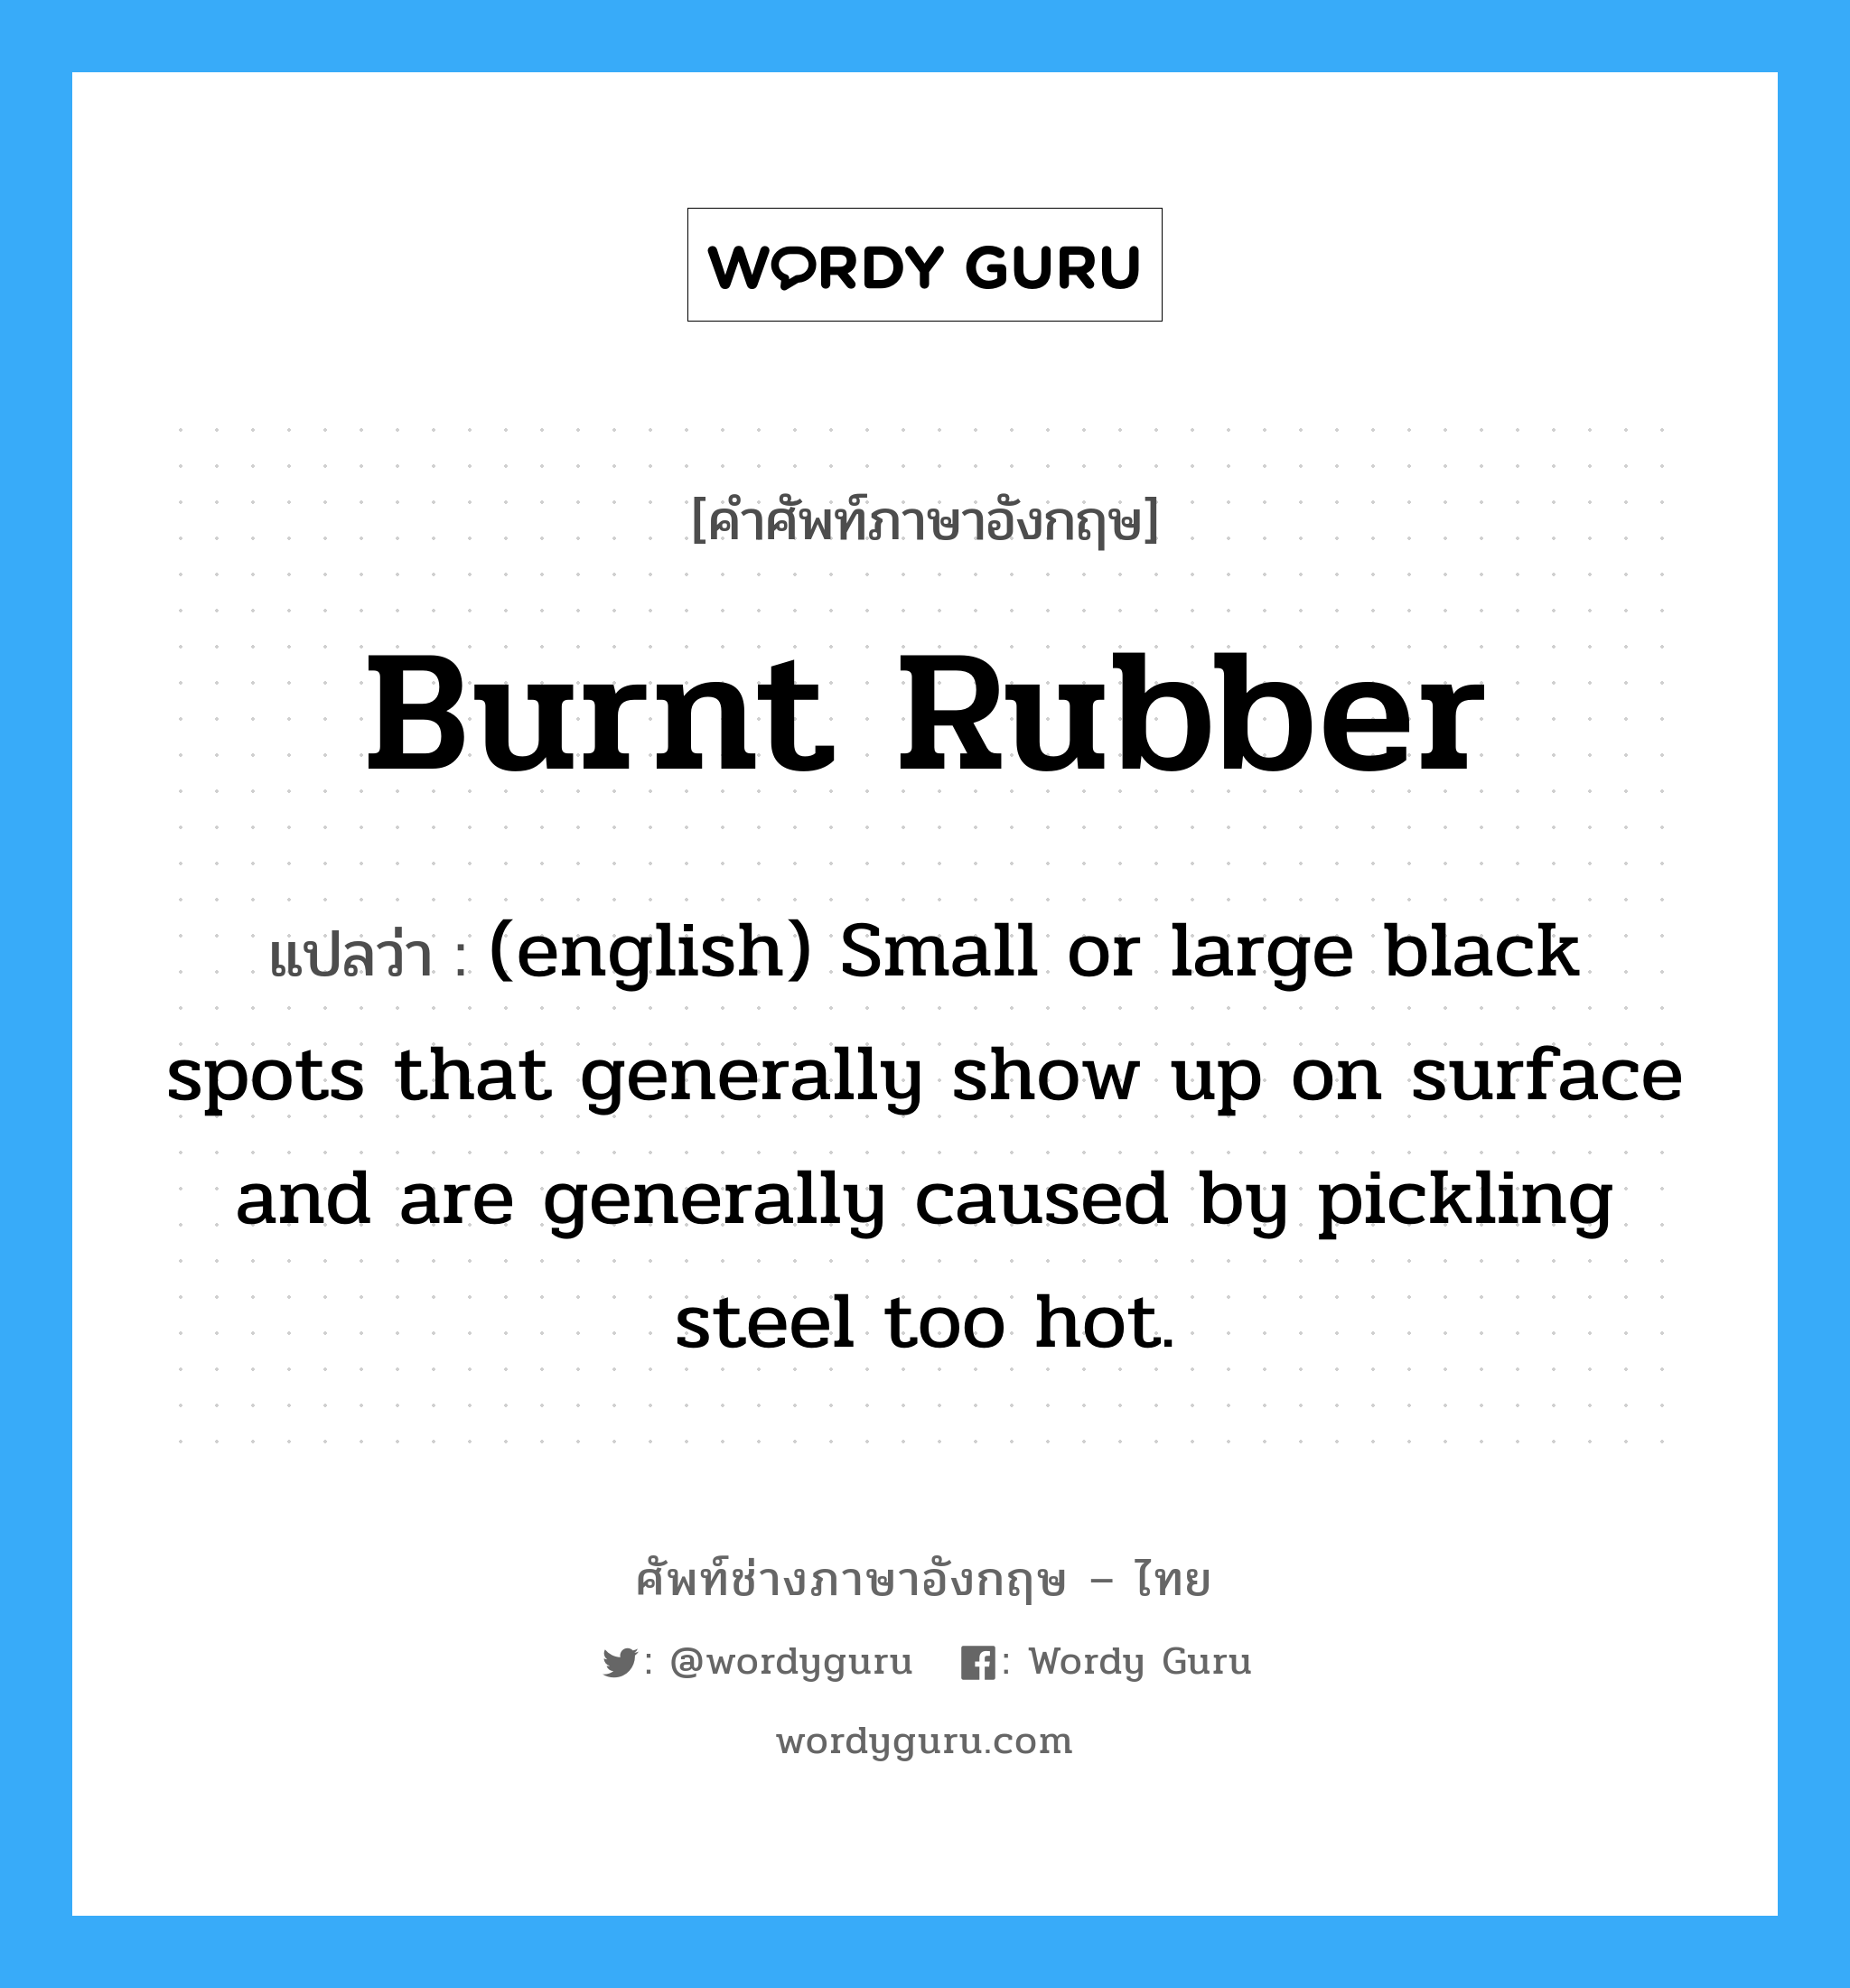 Burnt Rubber แปลว่า?, คำศัพท์ช่างภาษาอังกฤษ - ไทย Burnt Rubber คำศัพท์ภาษาอังกฤษ Burnt Rubber แปลว่า (english) Small or large black spots that generally show up on surface and are generally caused by pickling steel too hot.